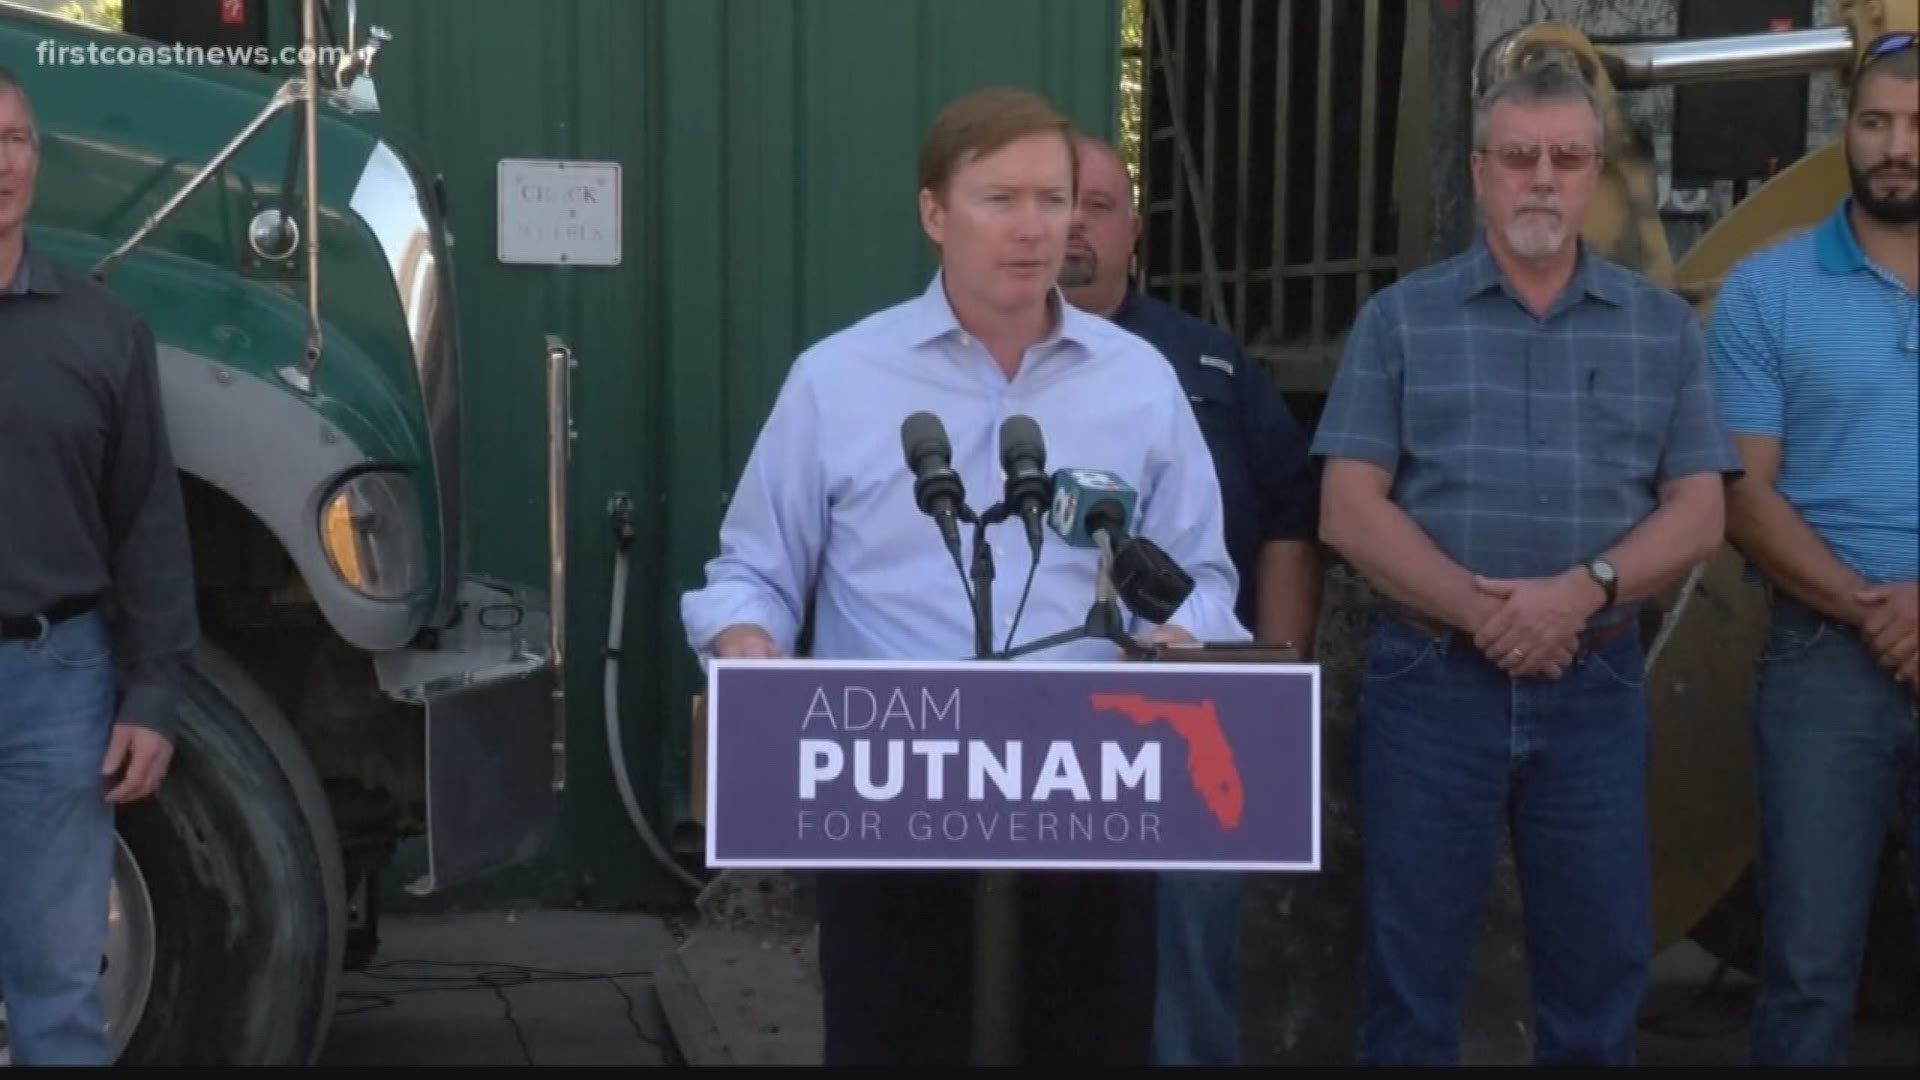 Publix reportedly donated to Adam Putnam's campaign and now there are calls for a boycott.